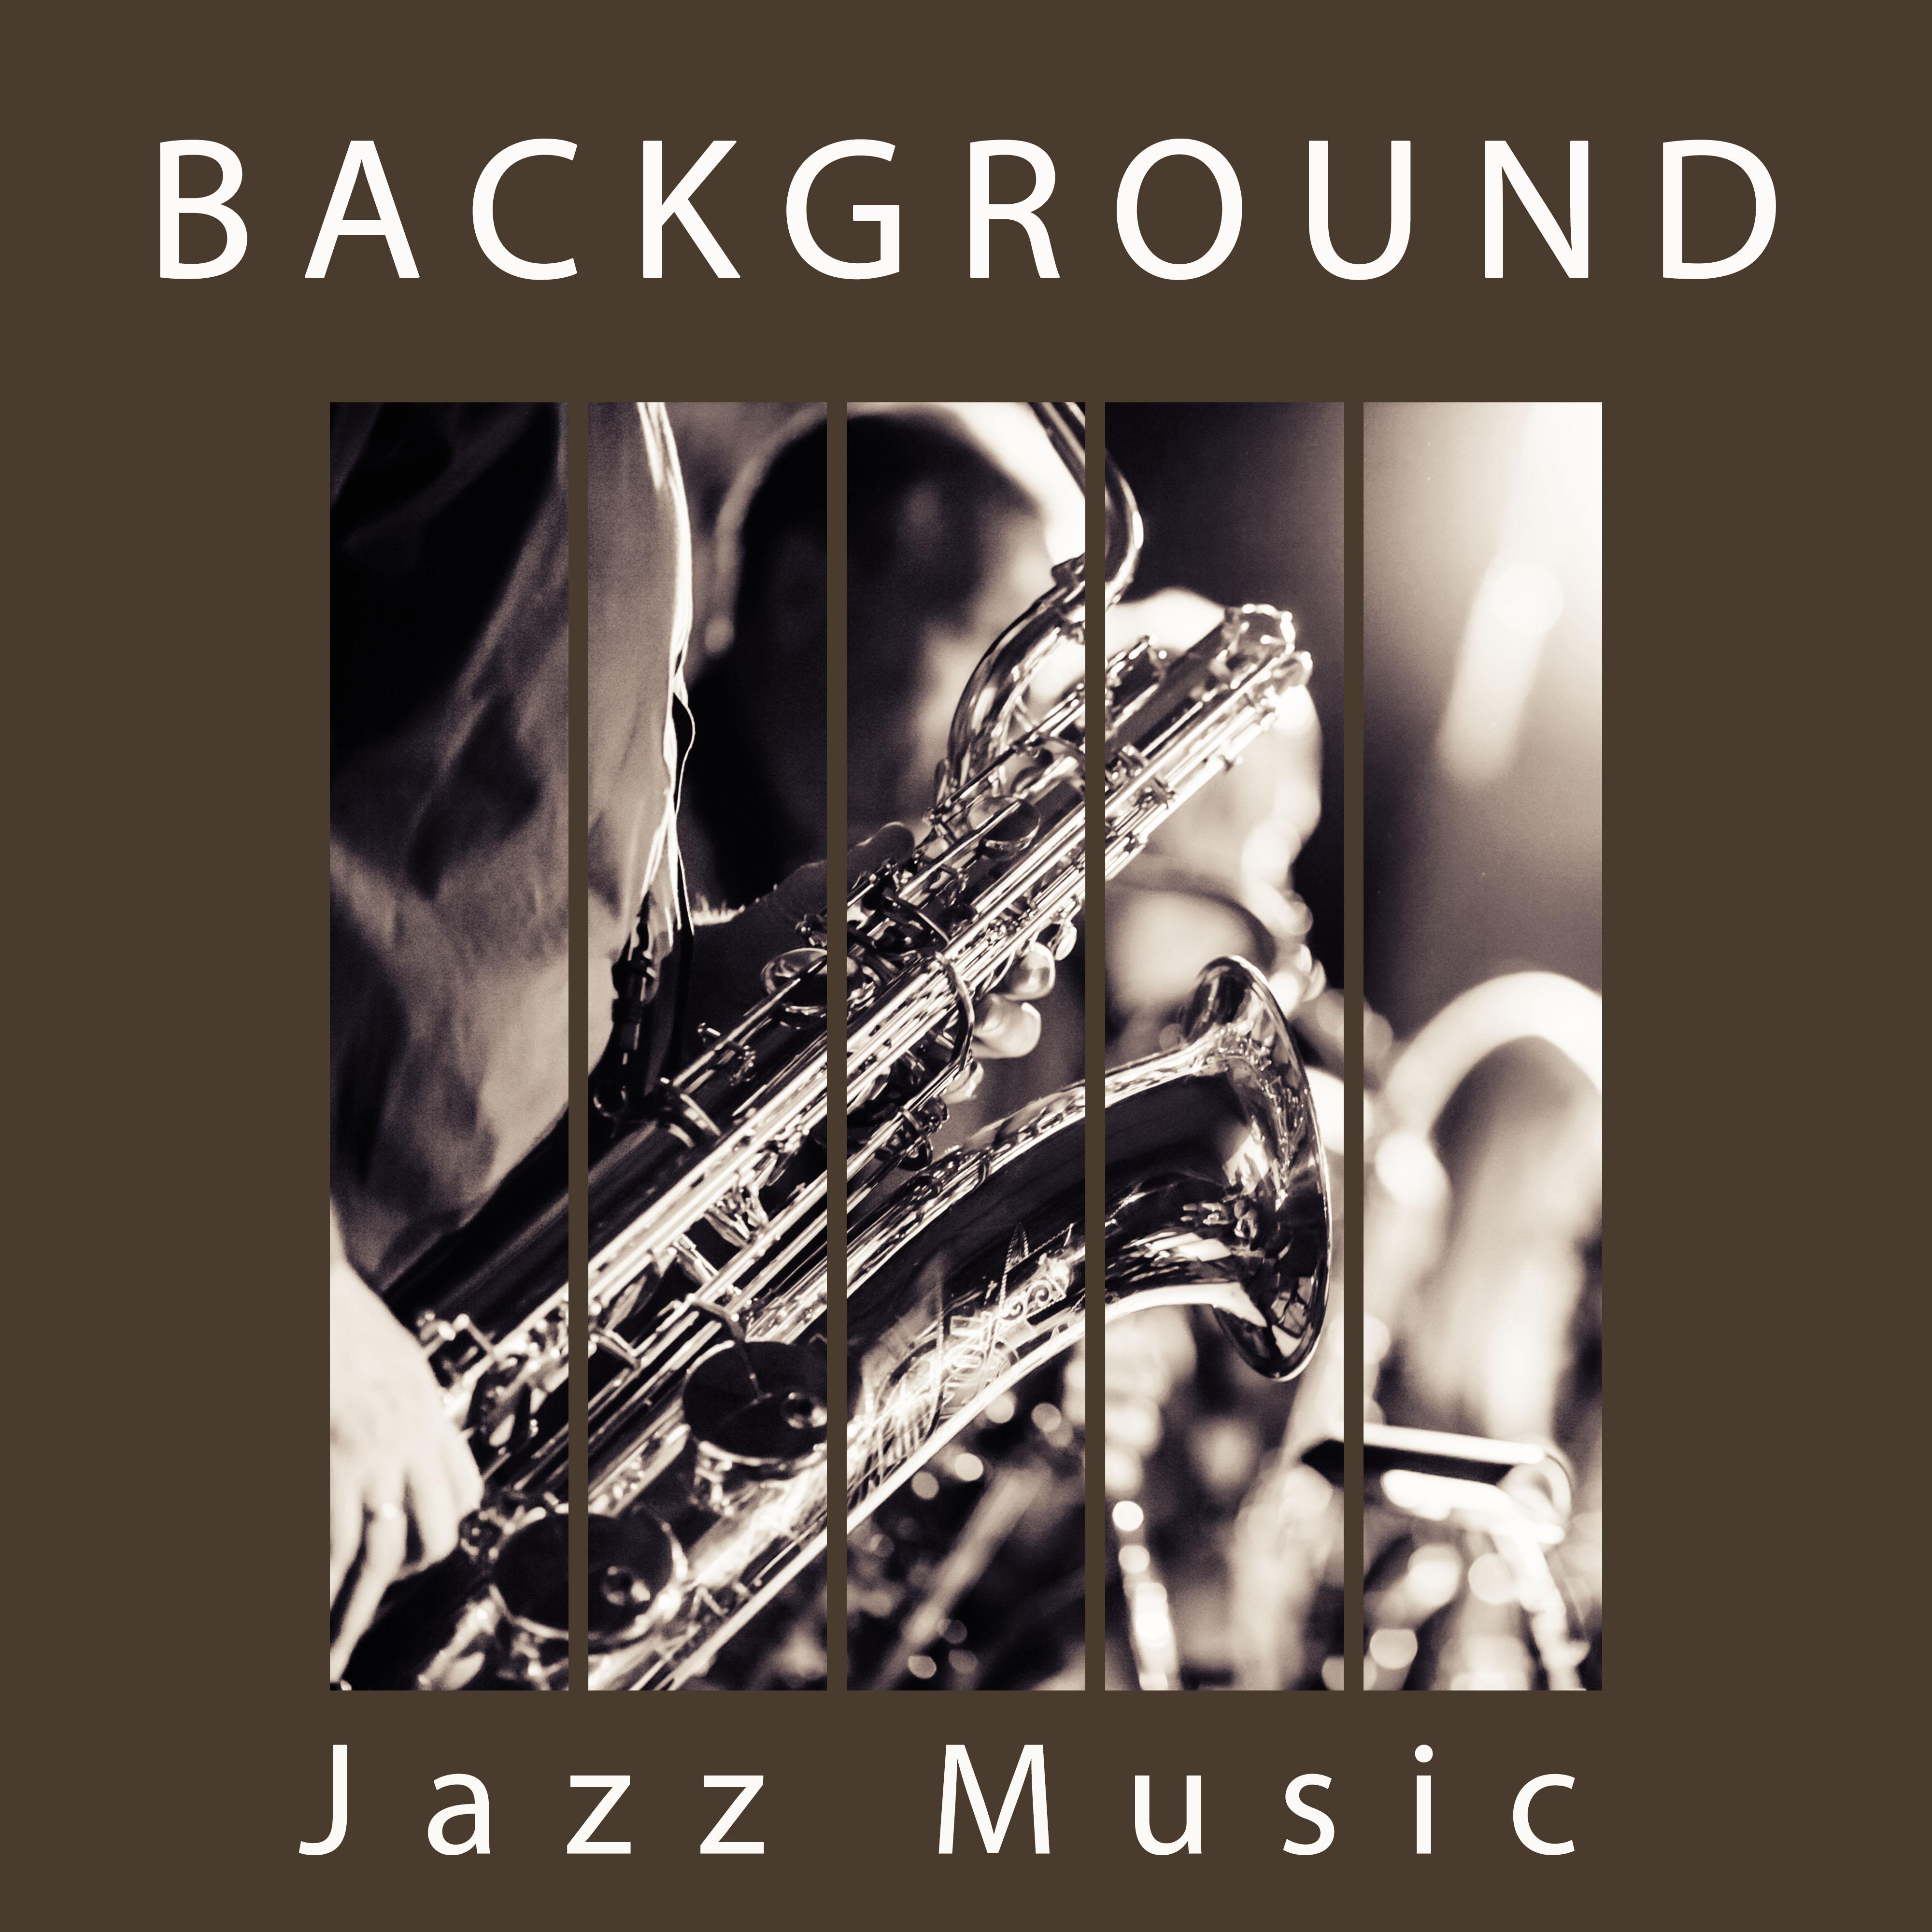 Background Jazz Music  Gentle Music for Lovers, Ambient Background Jazz Music for Restaurant